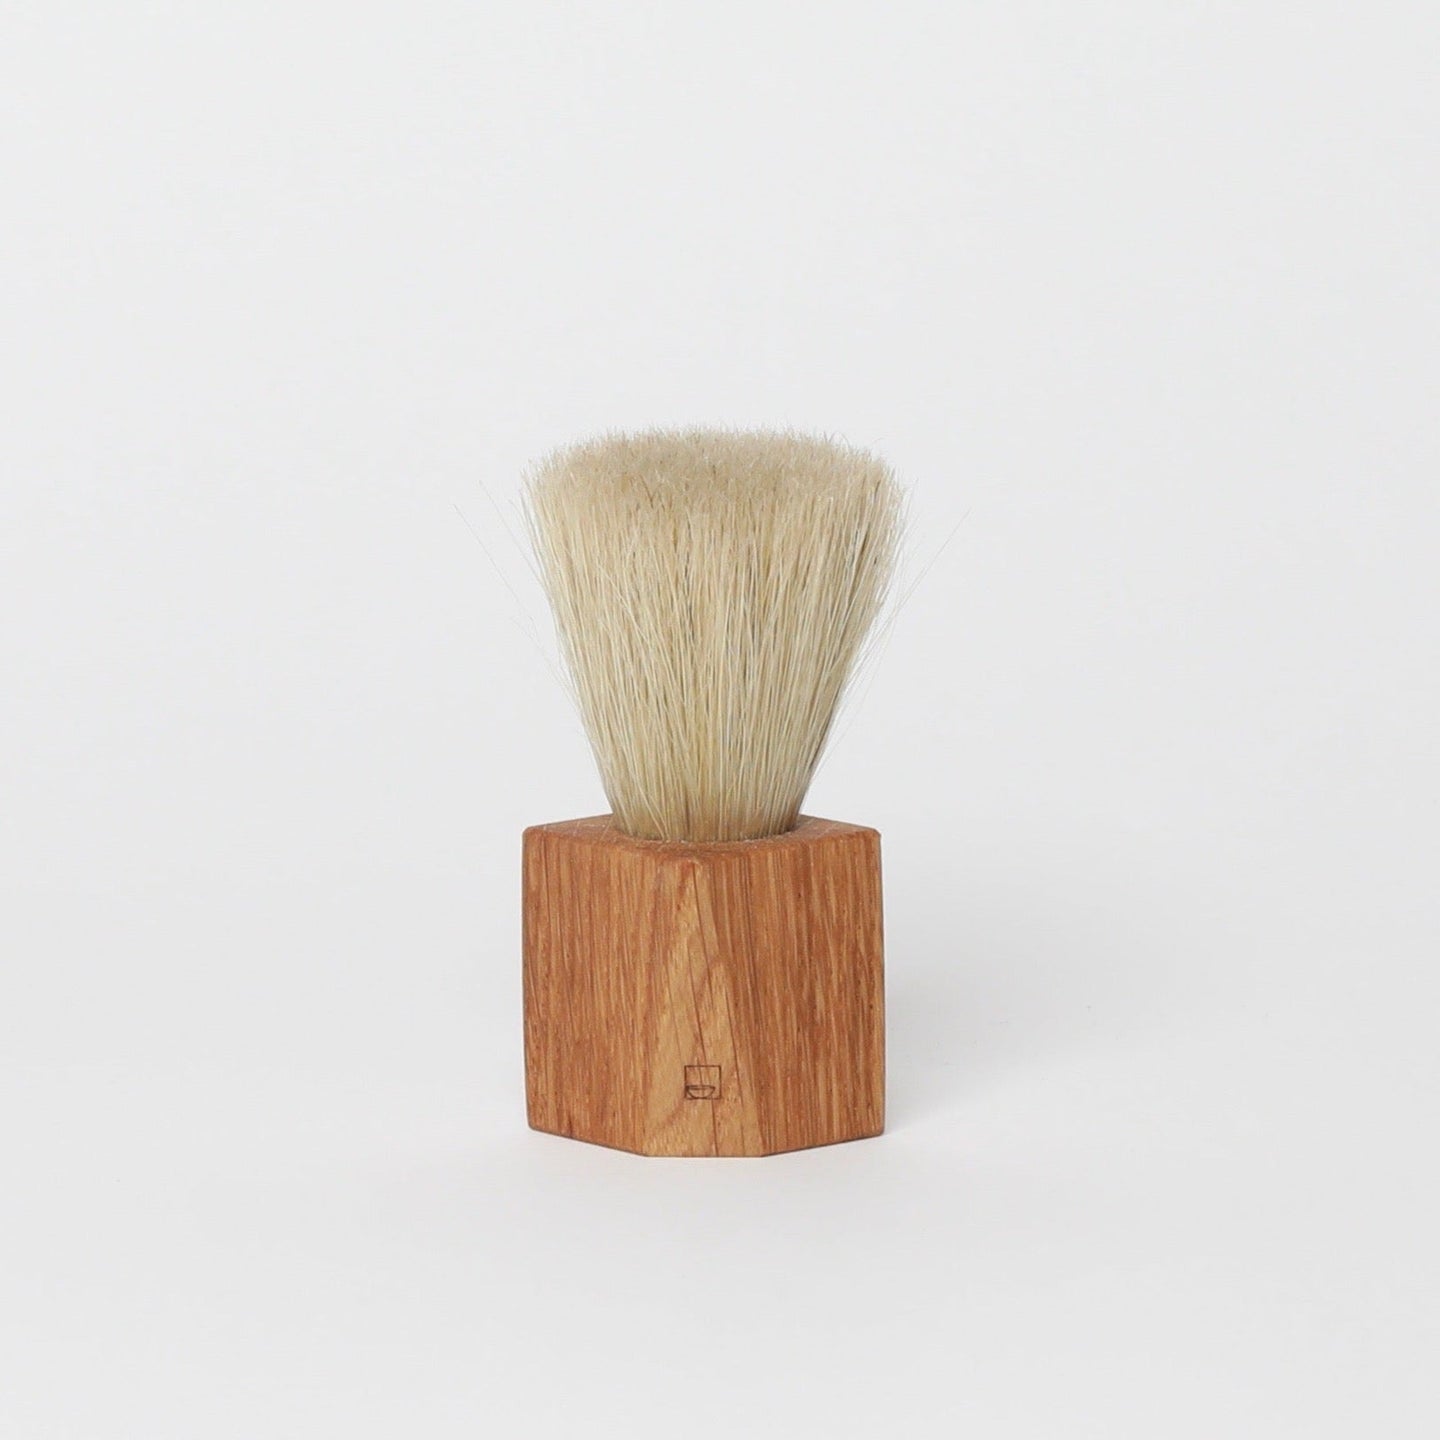 Boar Bristle Shaving Brush | made from hardwood offcuts - THE HOME OF SUSTAINABLE THINGS